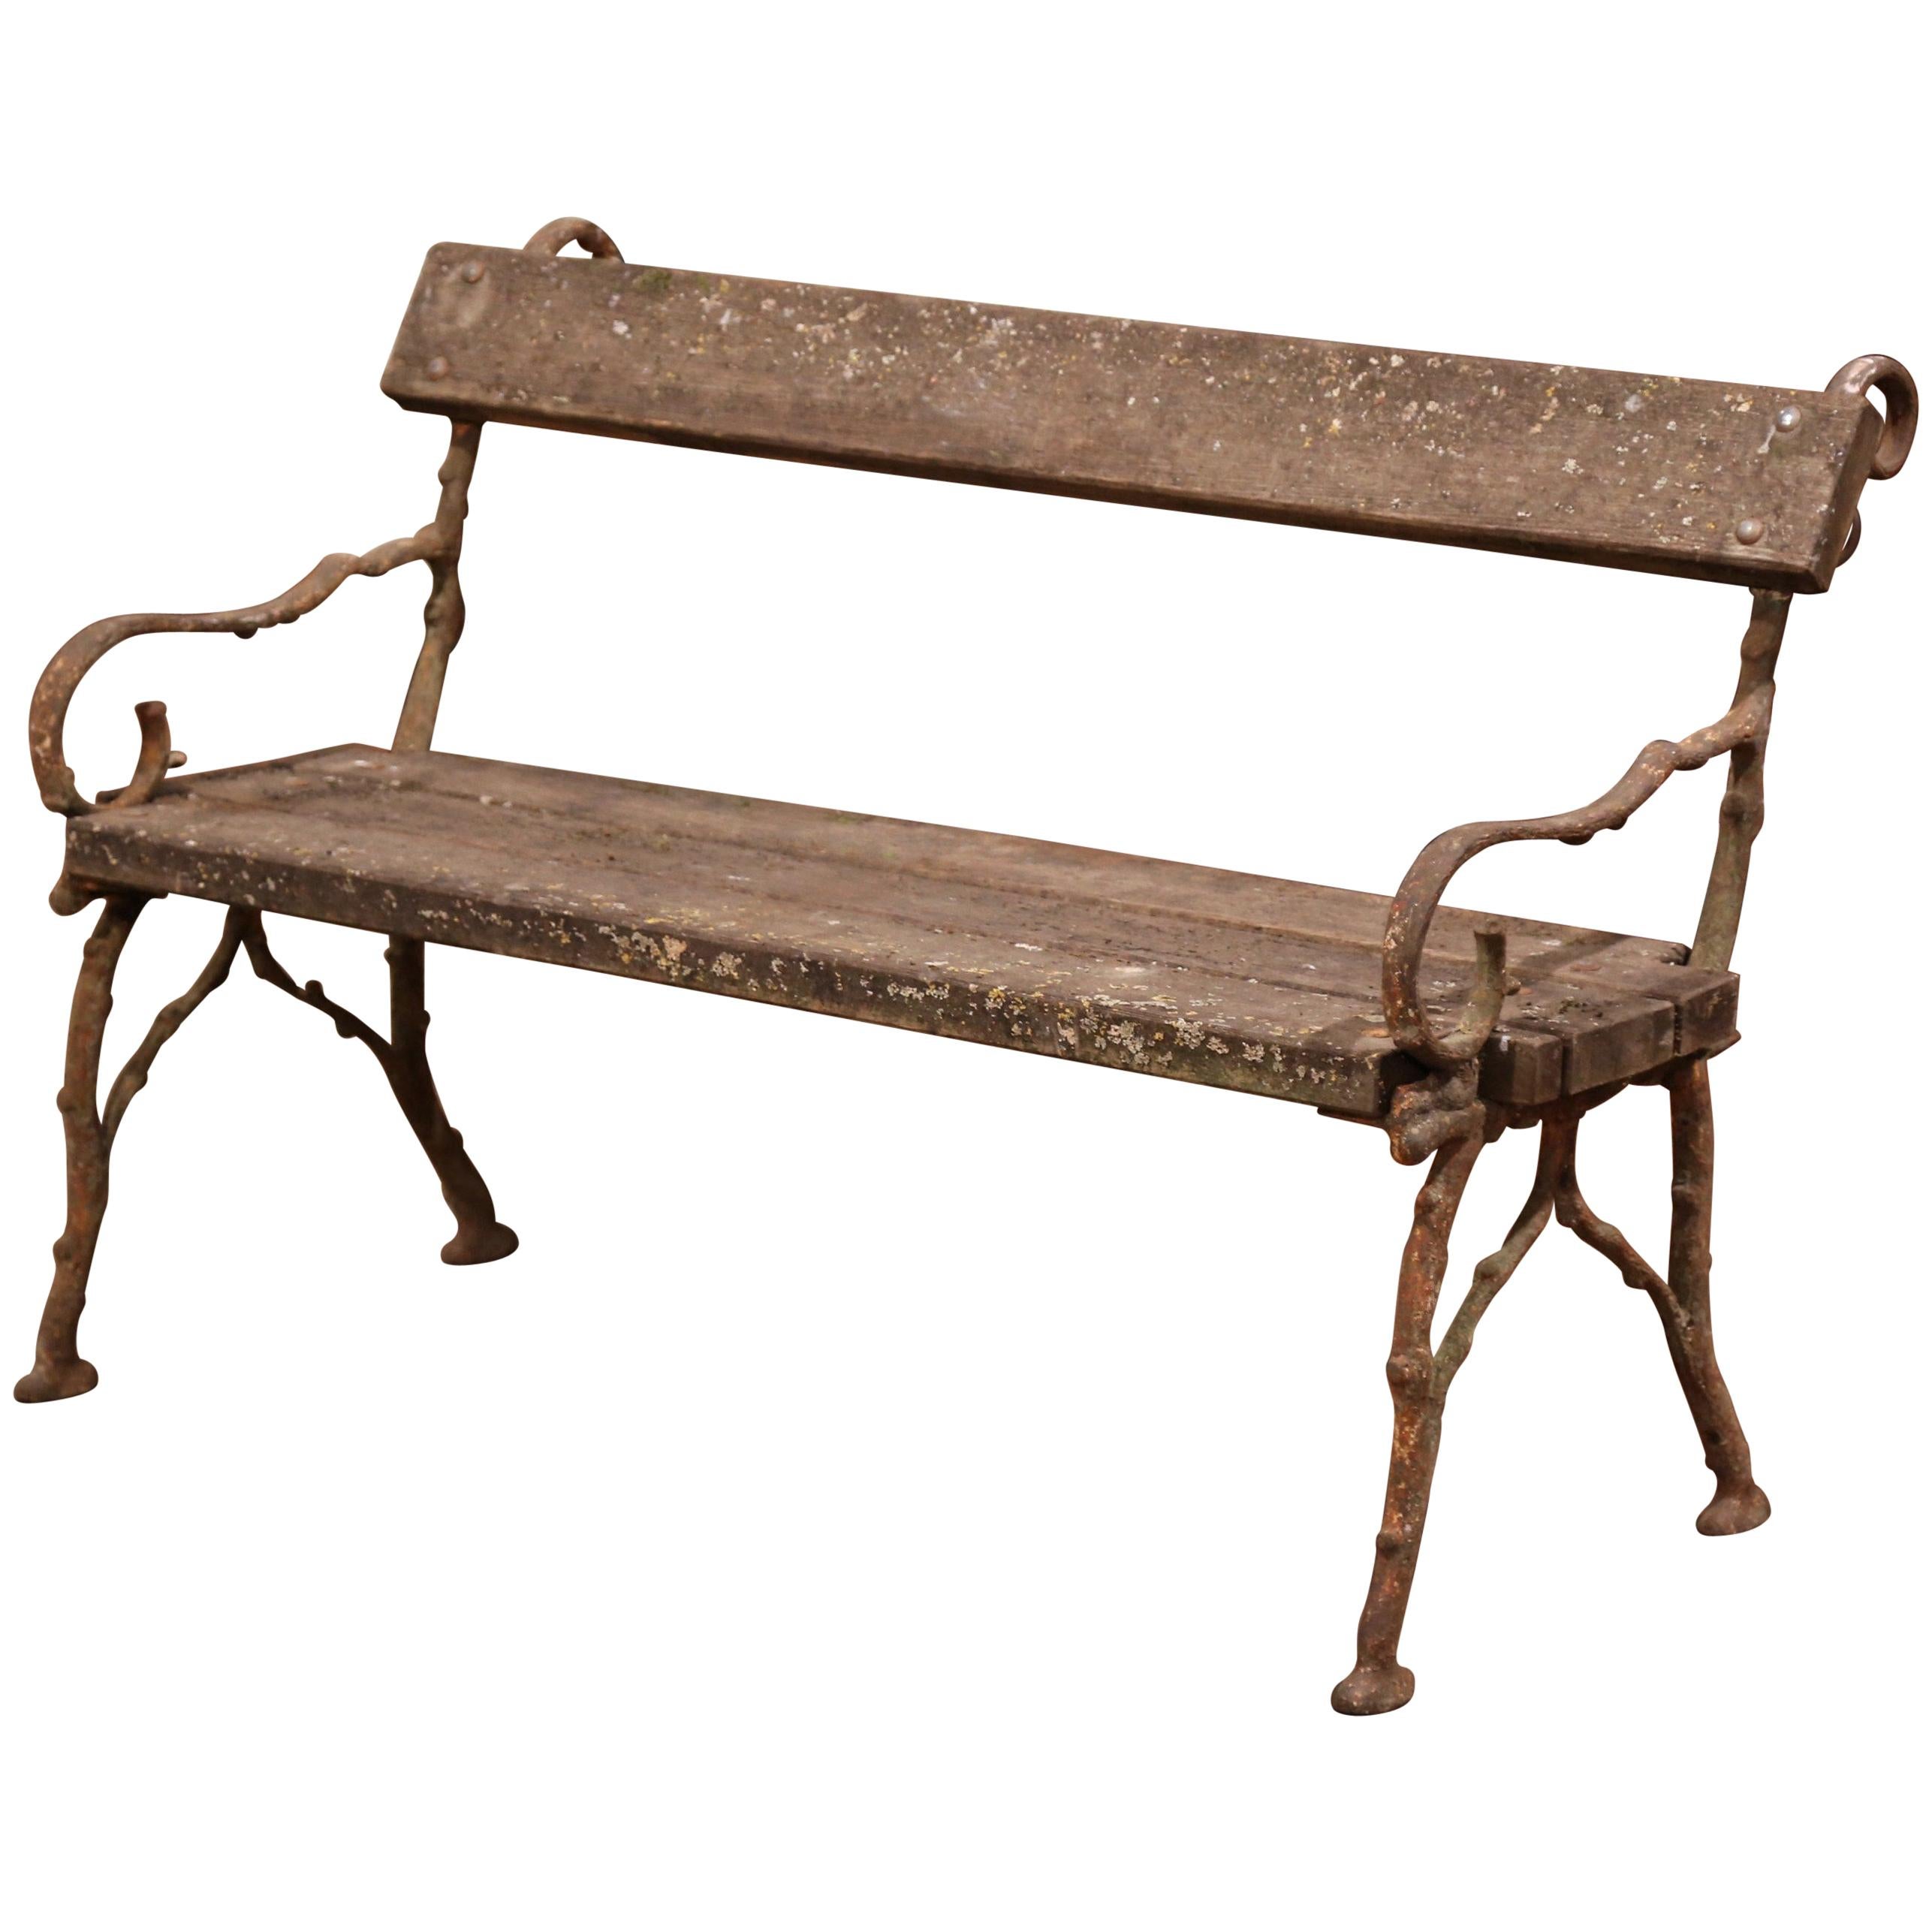 19th Century French Weathered Iron and Wood Outdoor Garden Bench